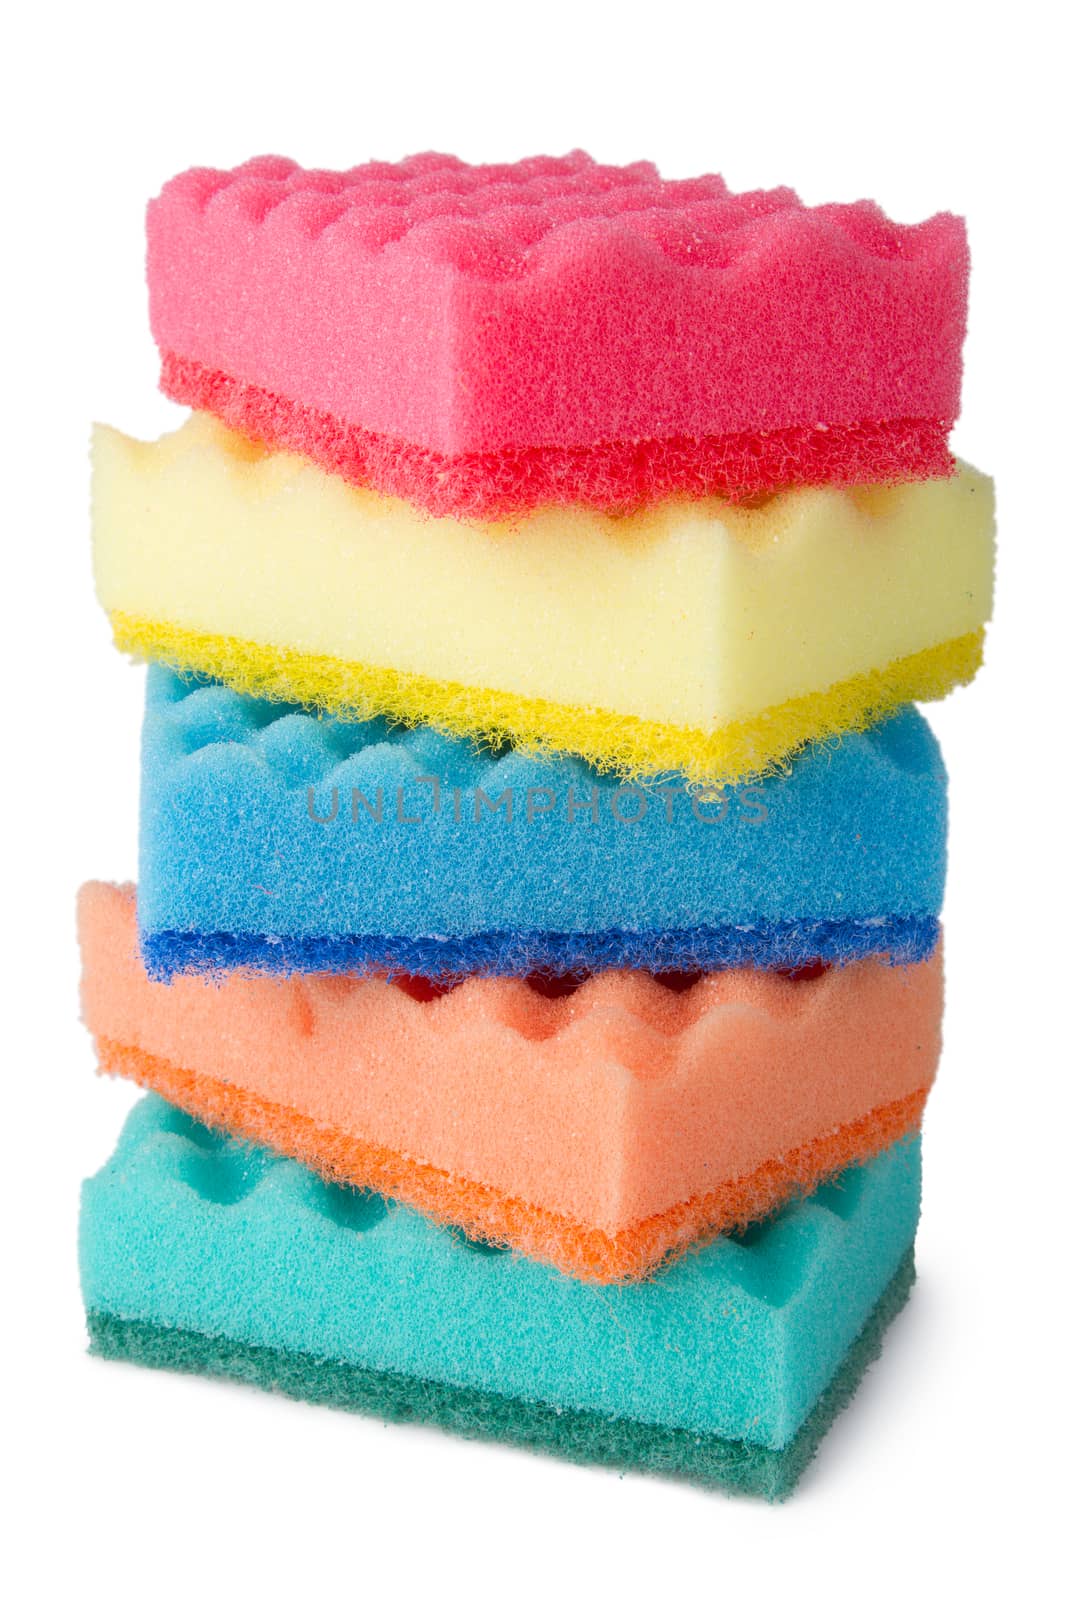 Colorful sponges for washing dishes isolated on white background